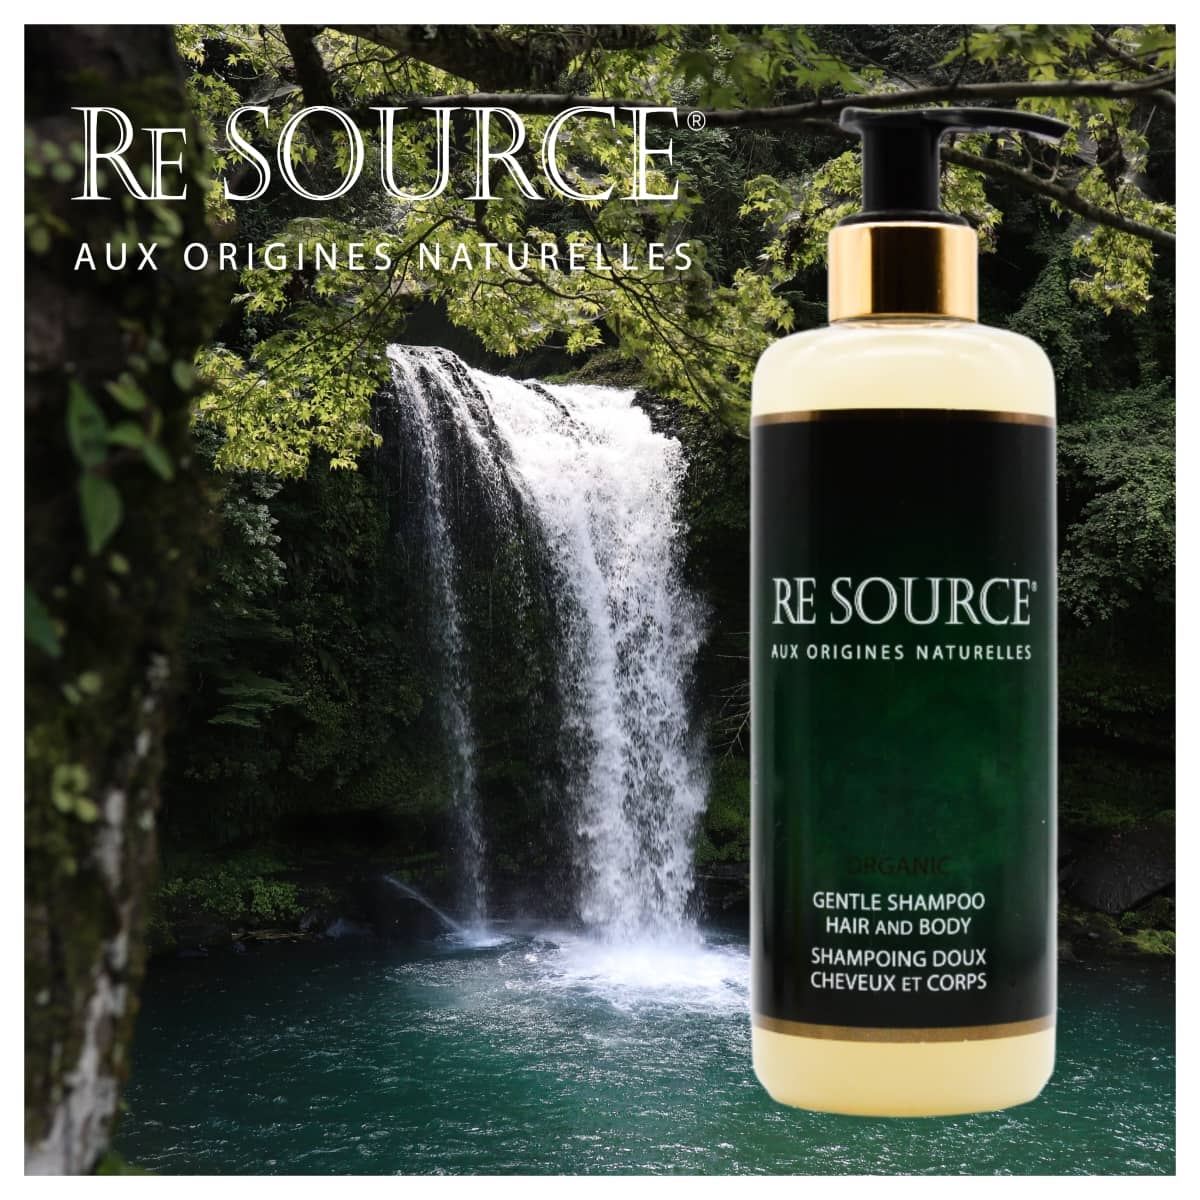 RE SOURCE natural organic guest toiletries for boutique hotels